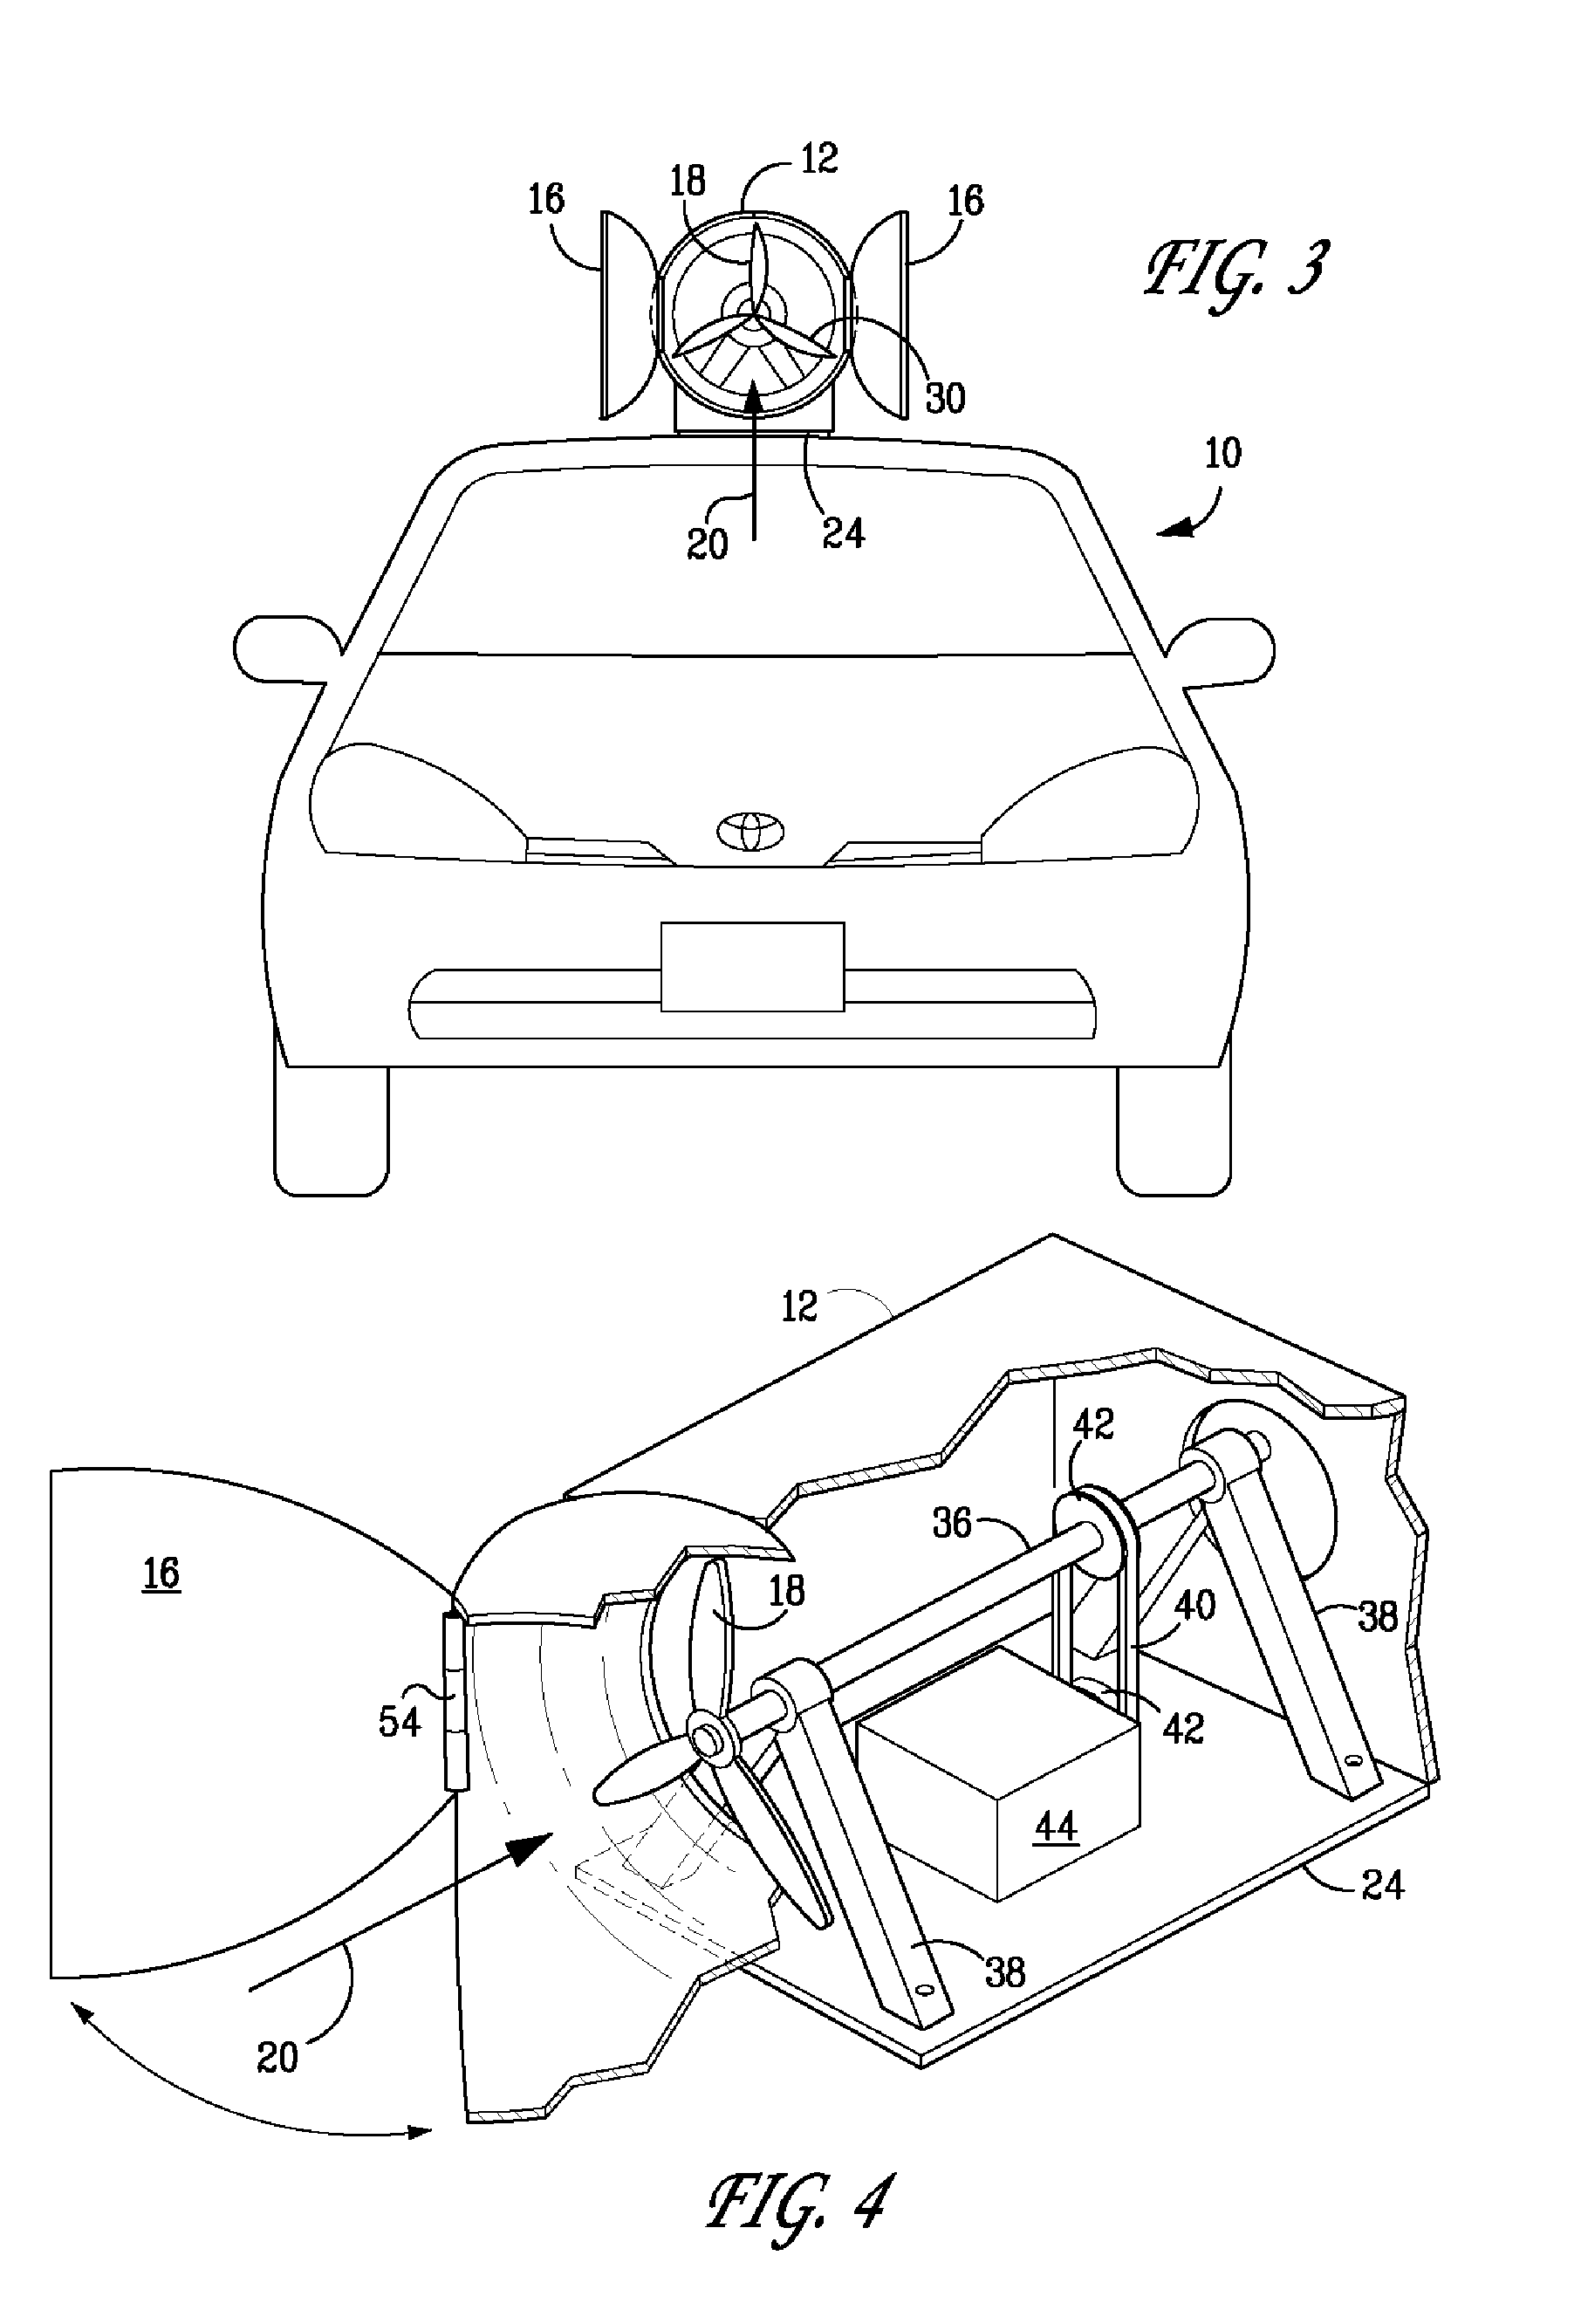 Wind driven generator for powered vehicles